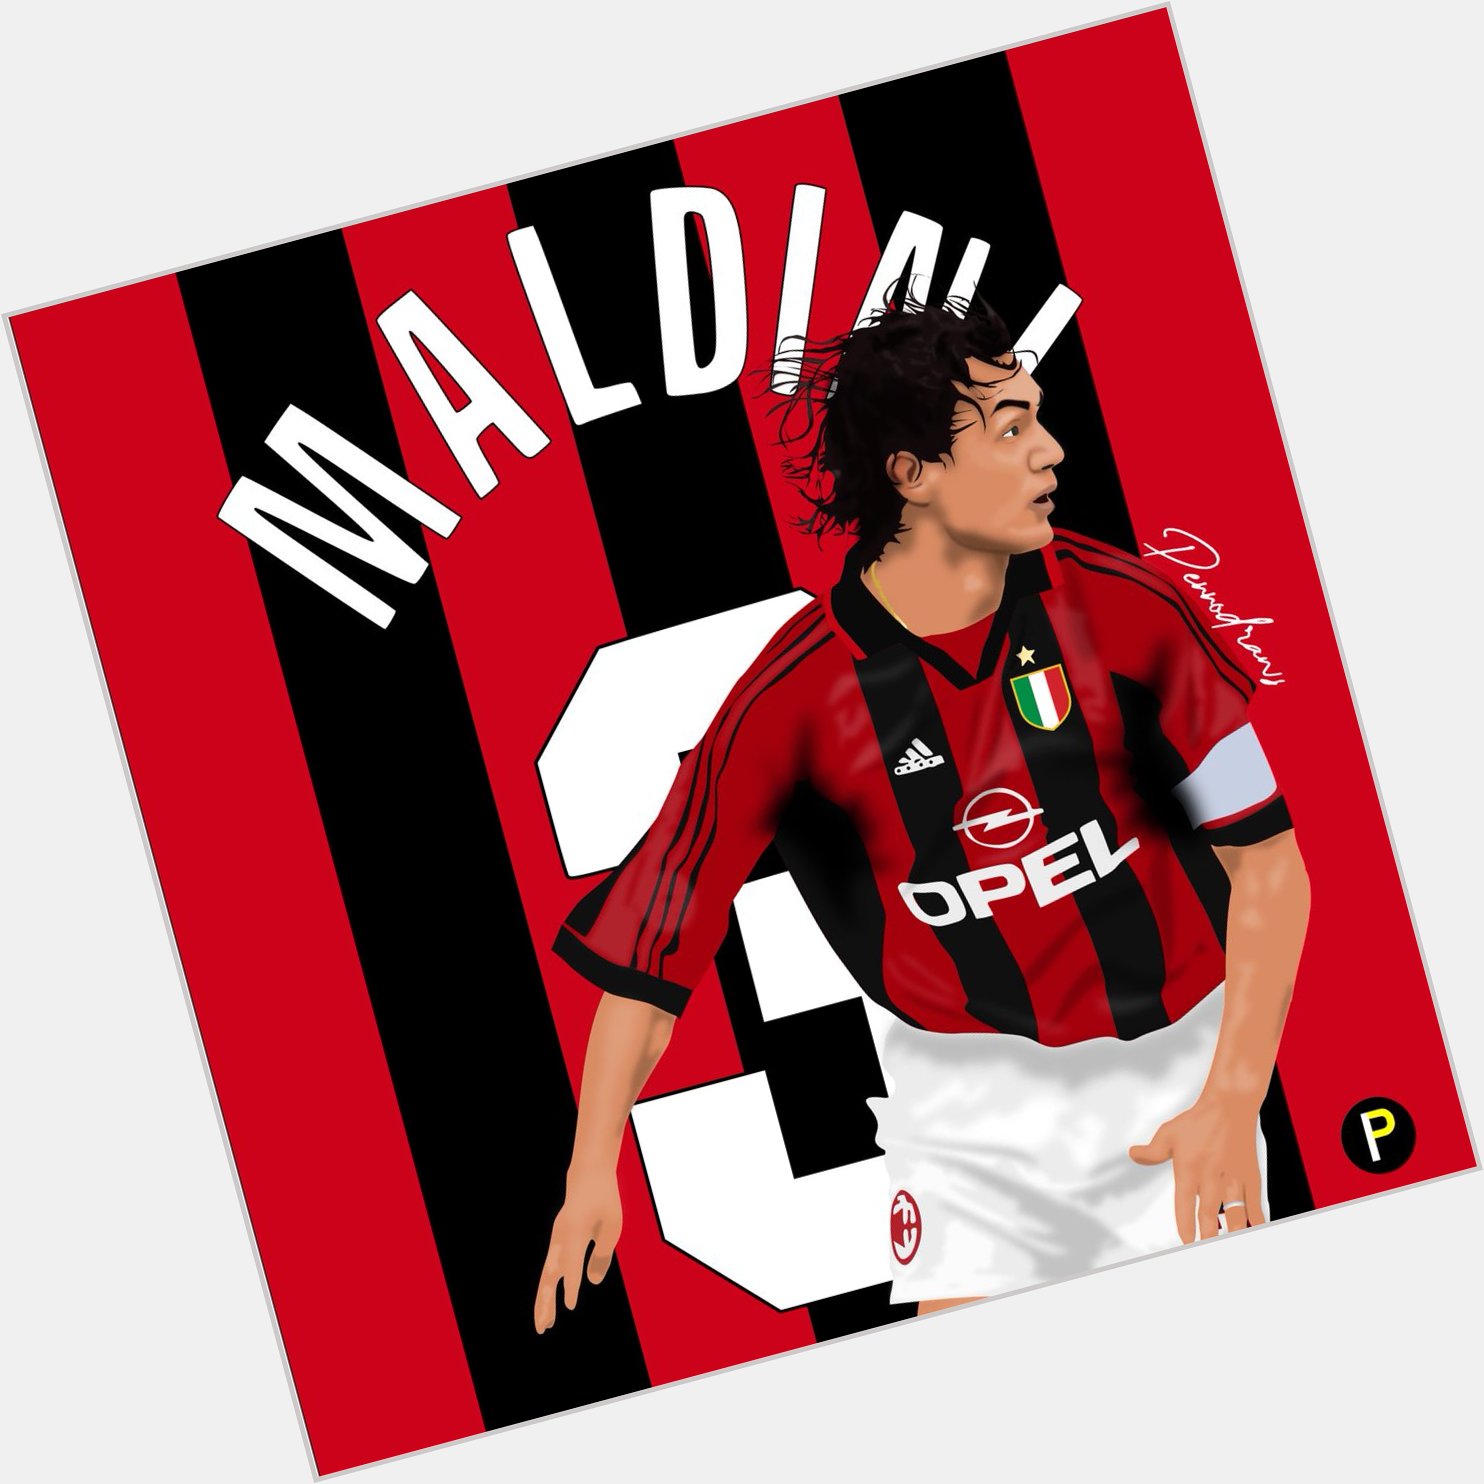 Happy birthday to one of the greatest Paolo 